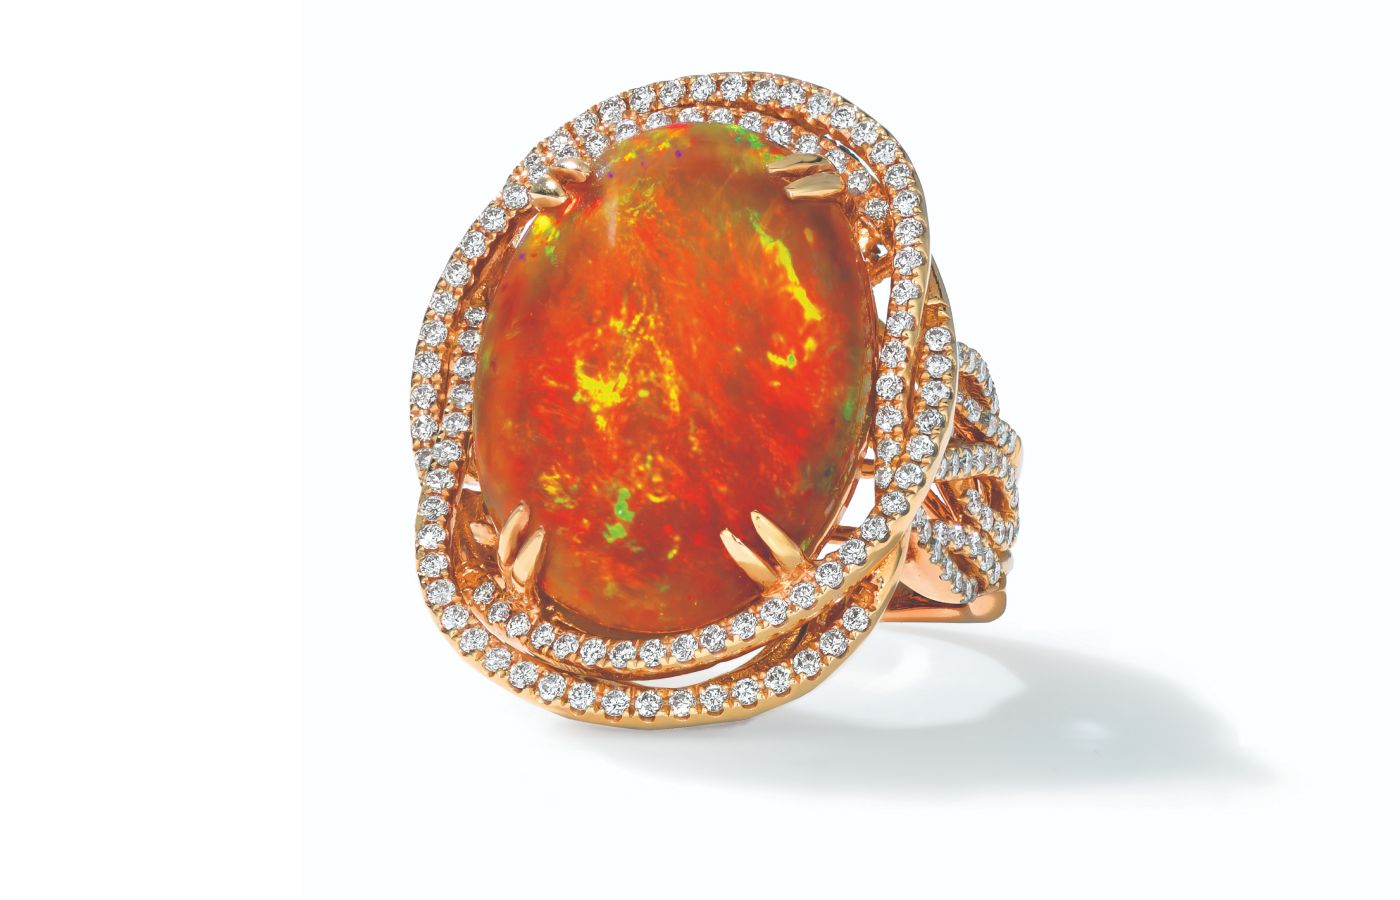 Le Vian's Couture High Jewellery is a Gemstone Paradise